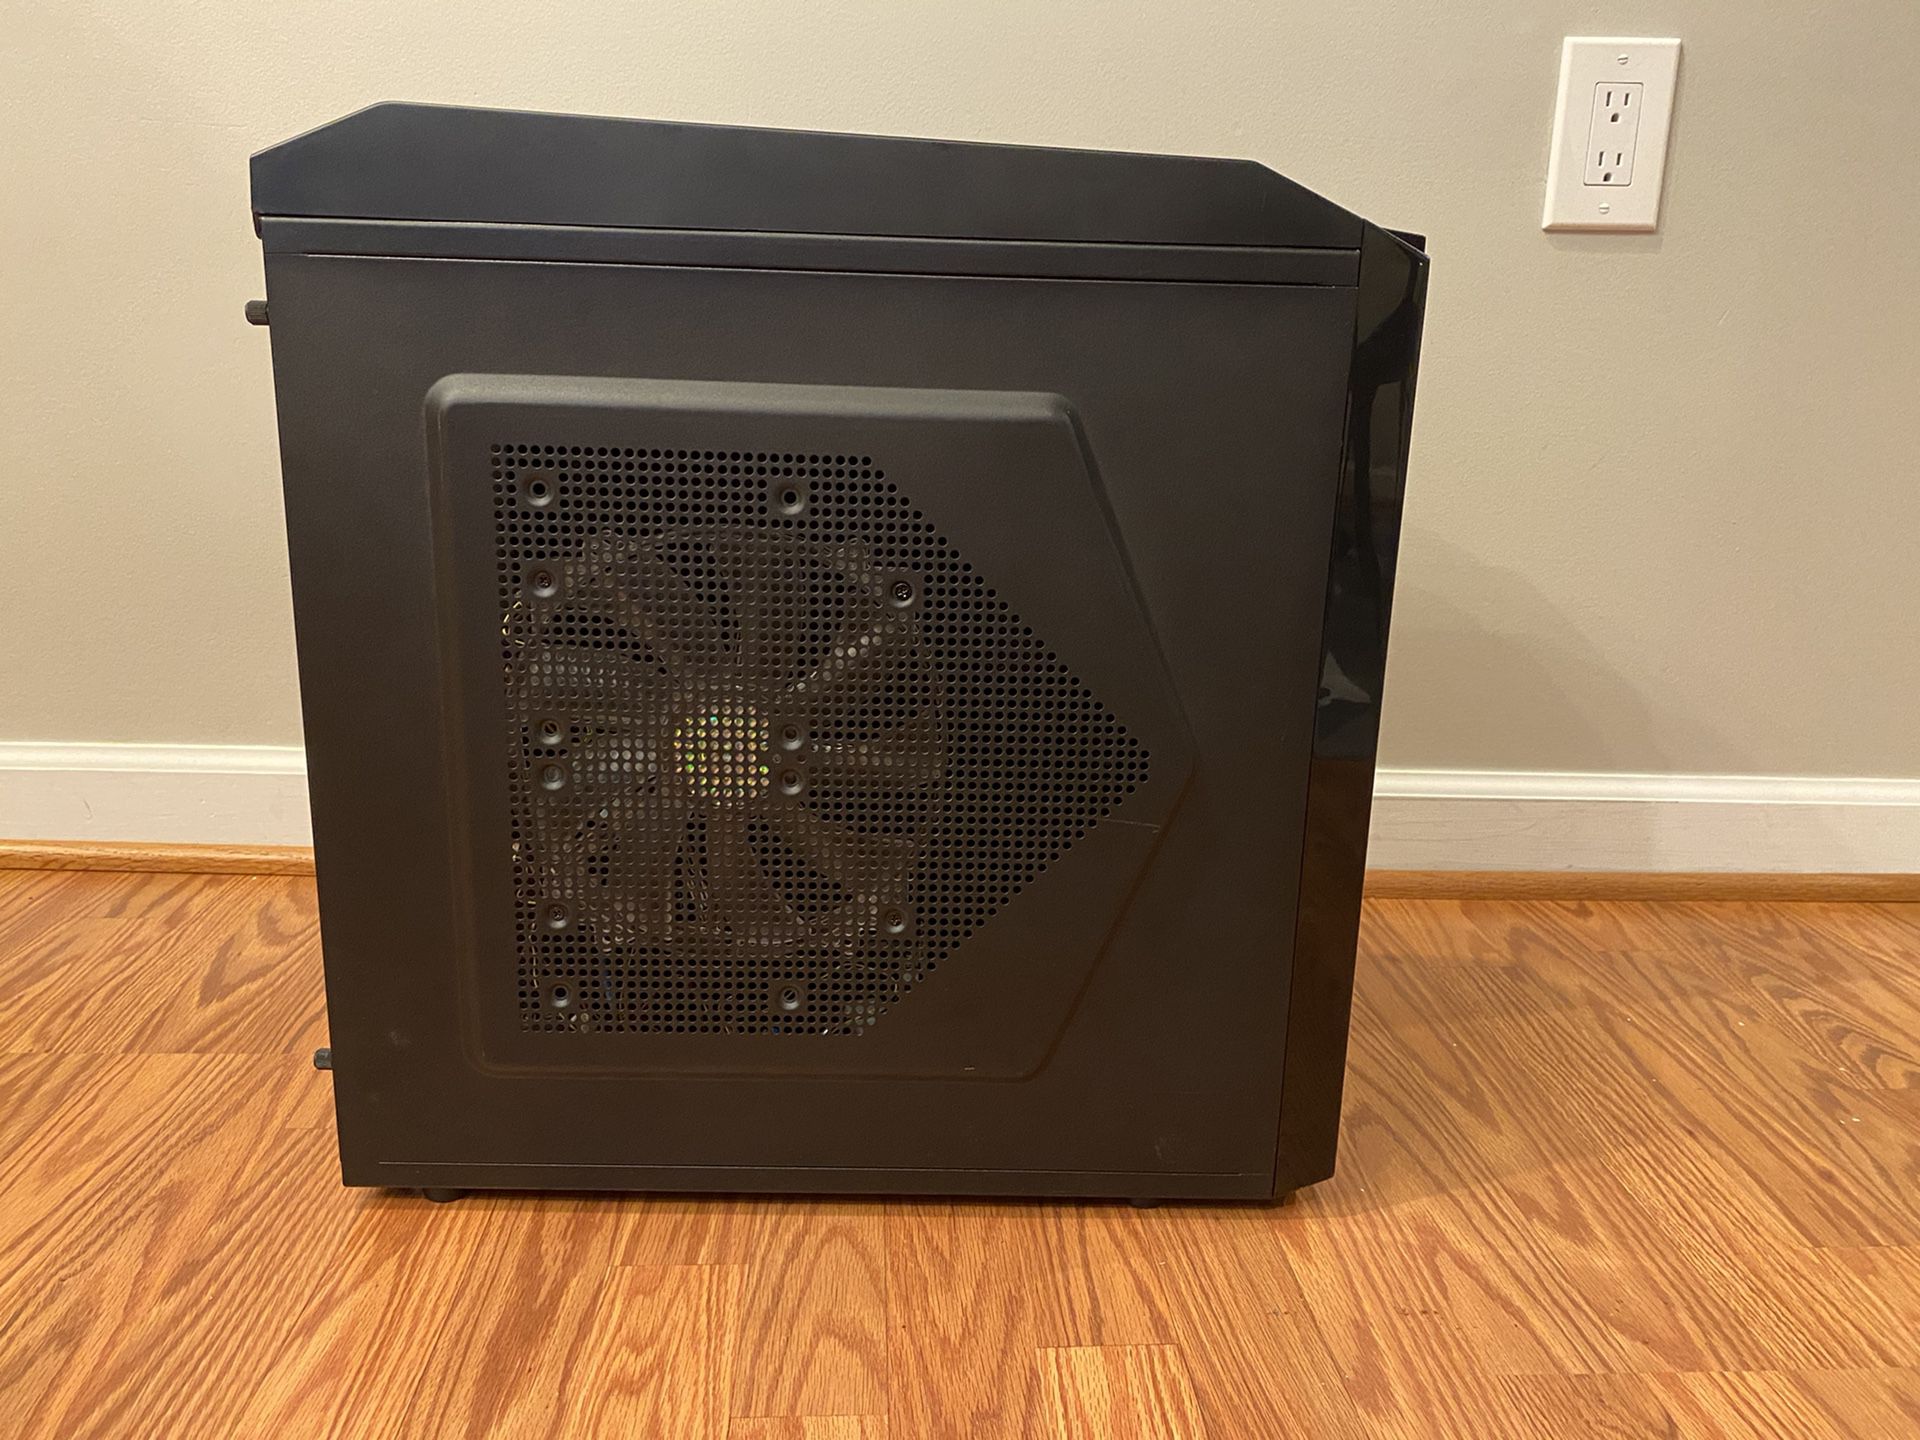 XION Predator ATX Mid Tower PC Case with extra fans